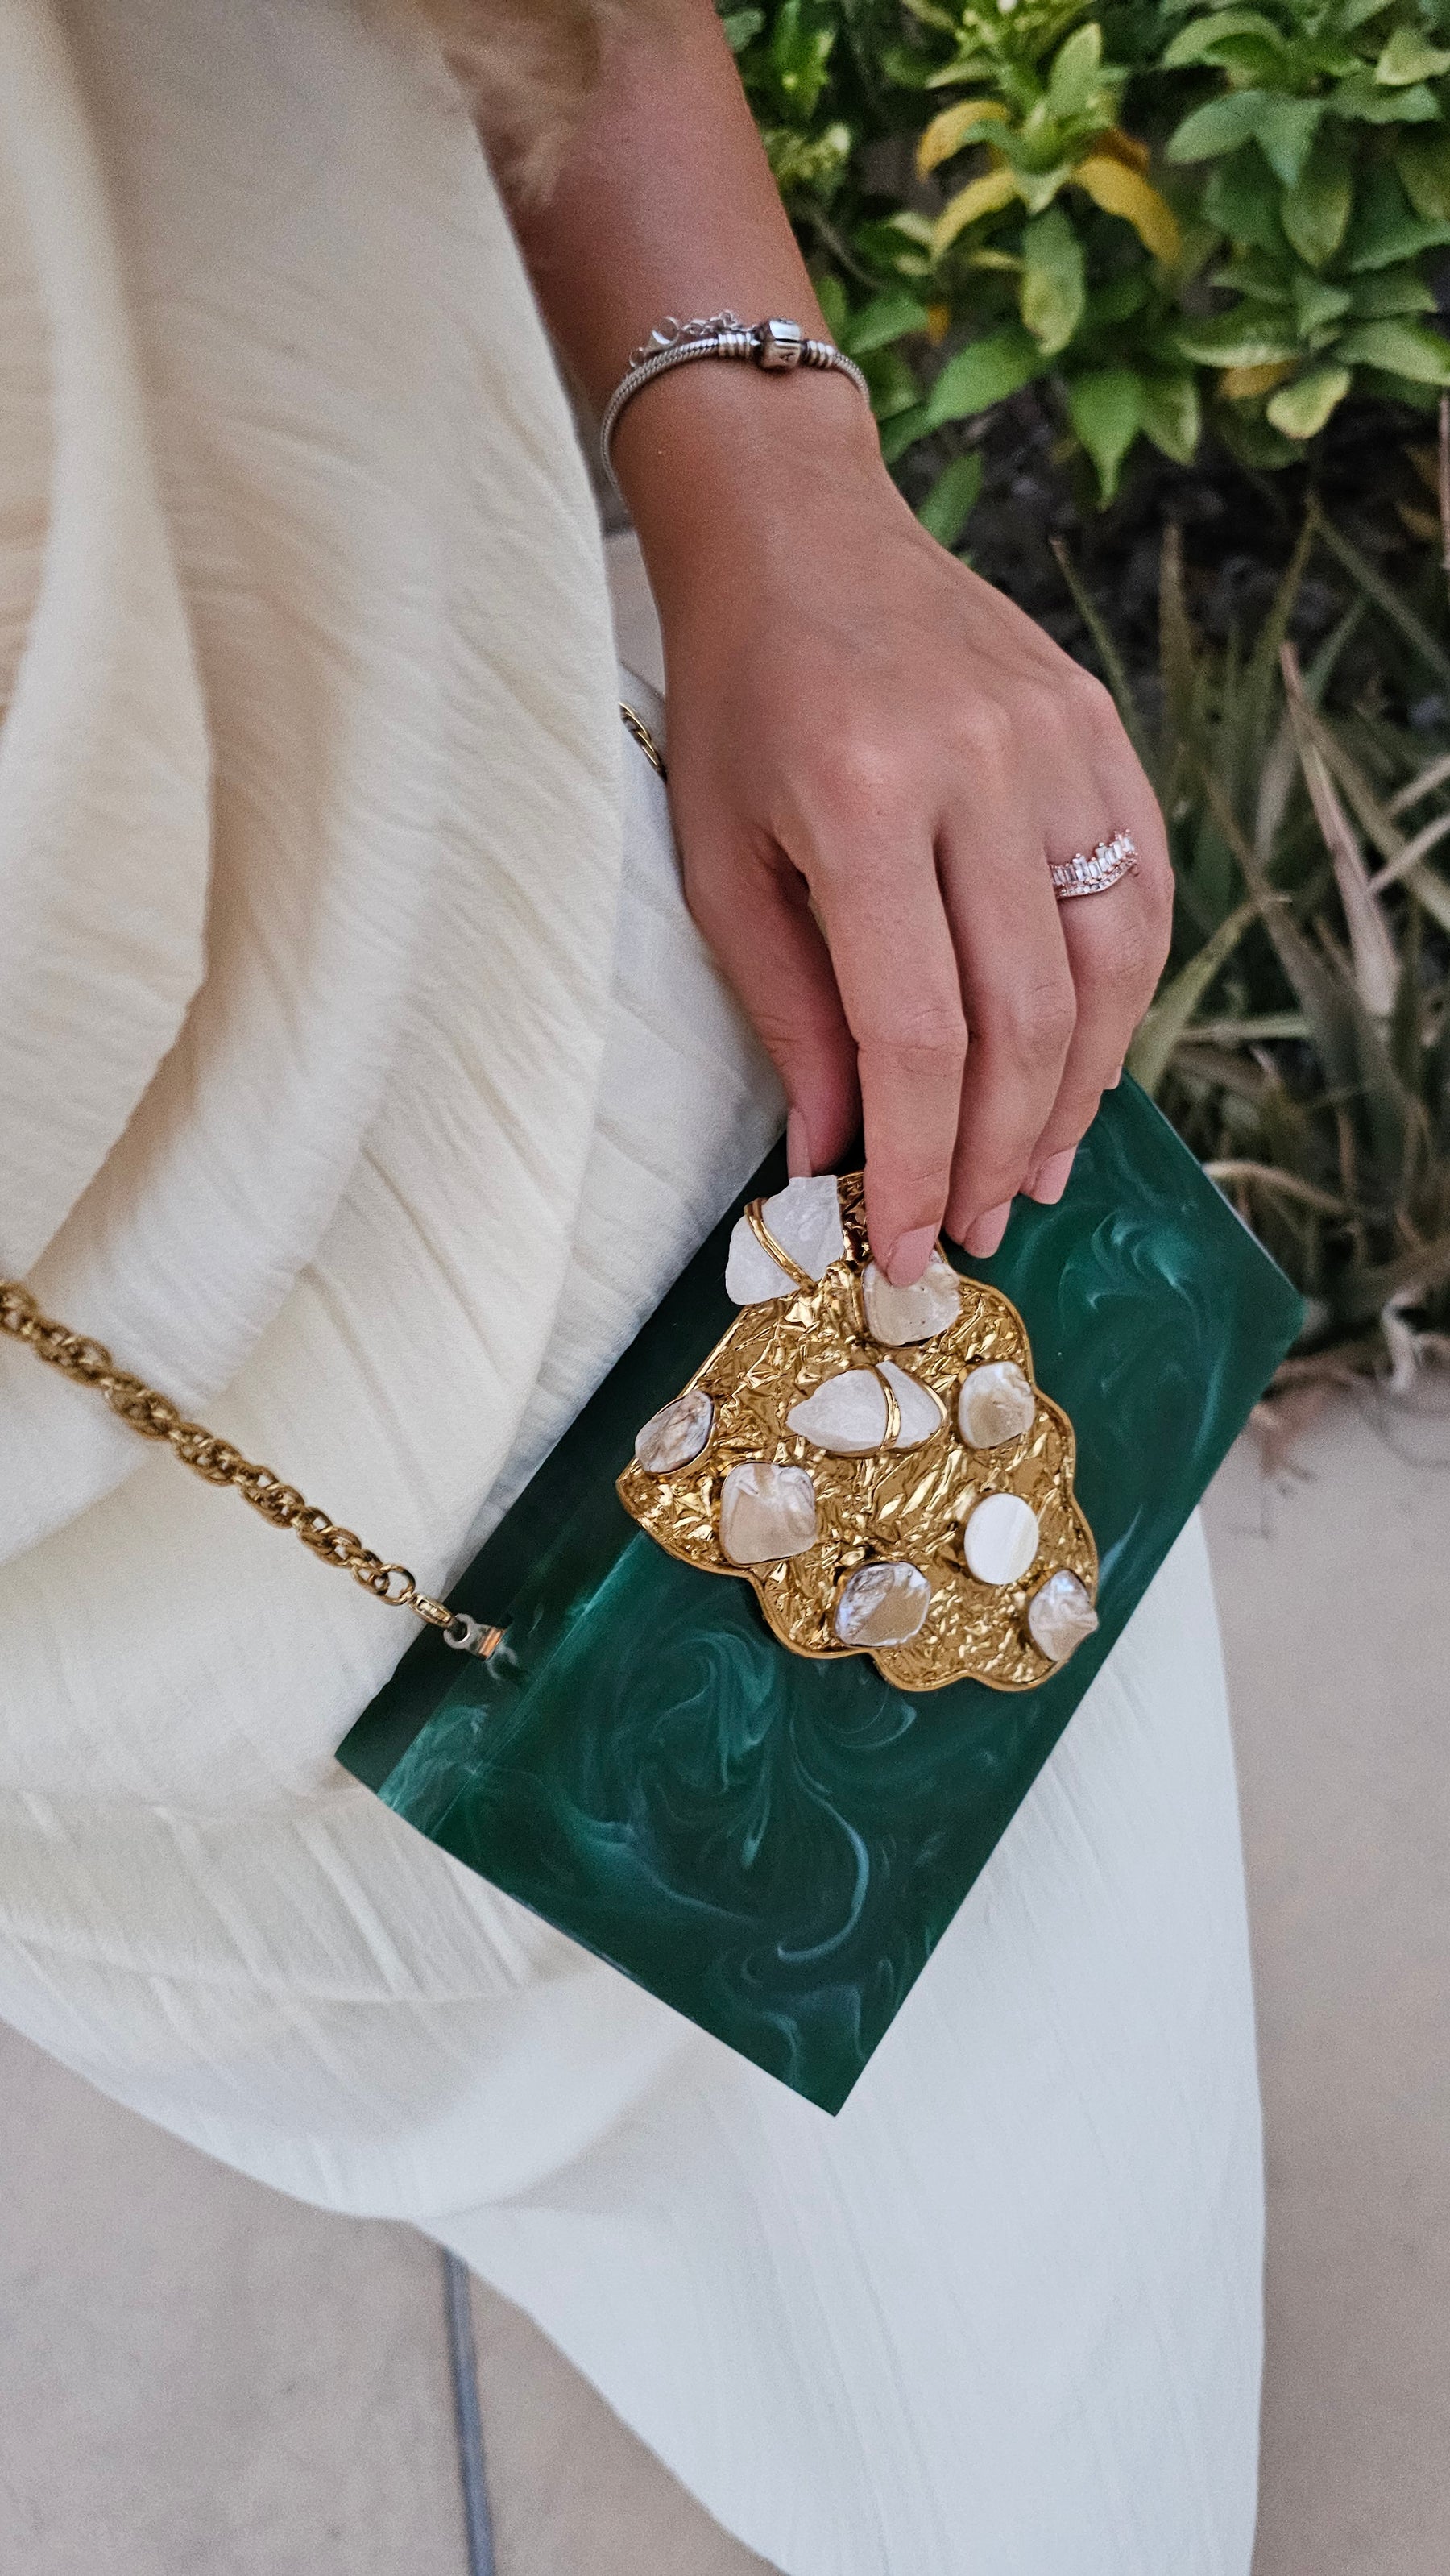 Captivate with Charm Clutch (Emerald Green)